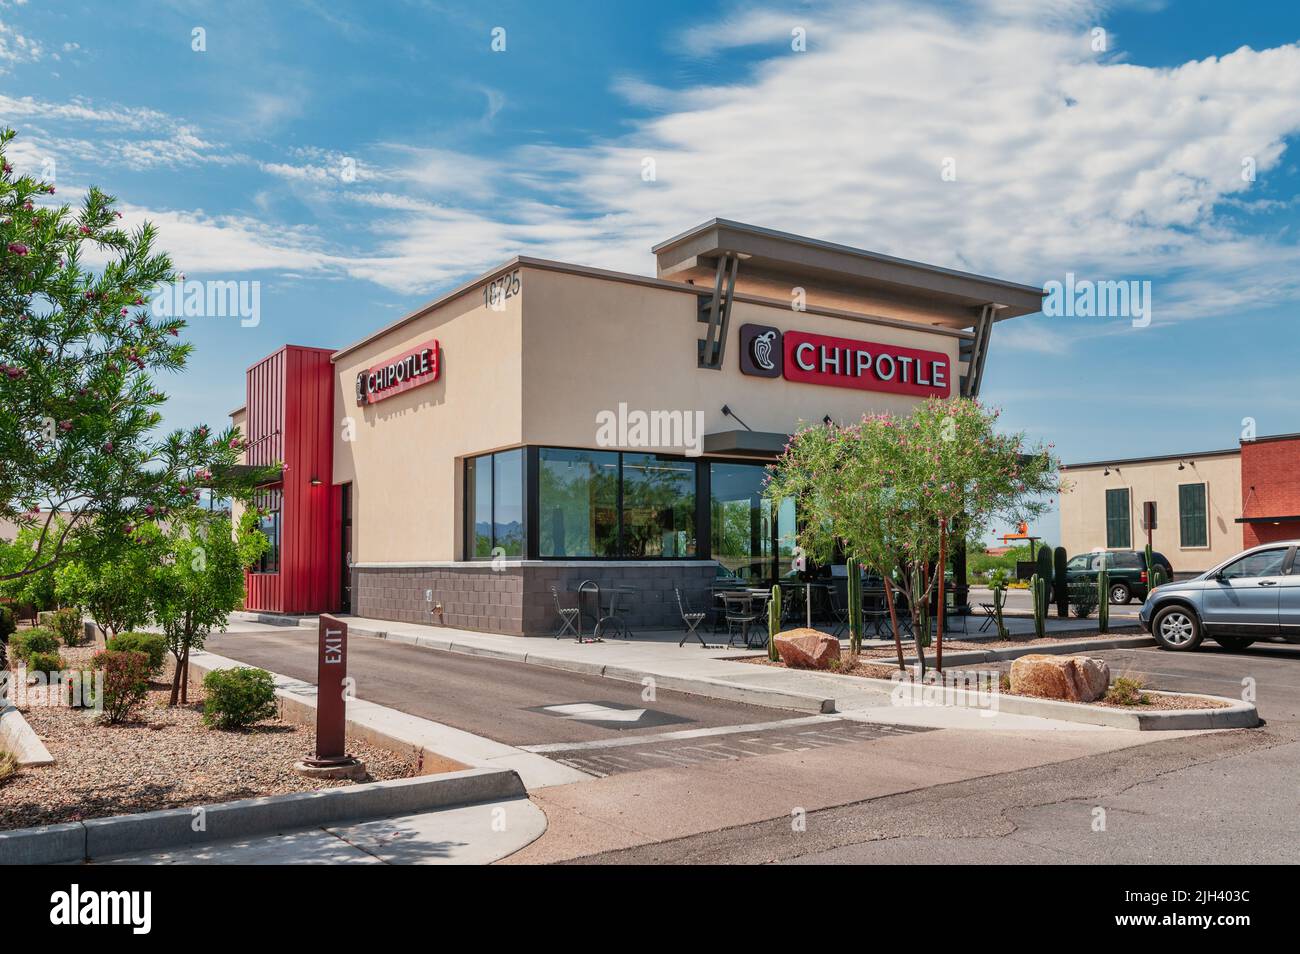 Chipotle Mexican Grill Restaurant in Green Valley, Arizona. Stockfoto